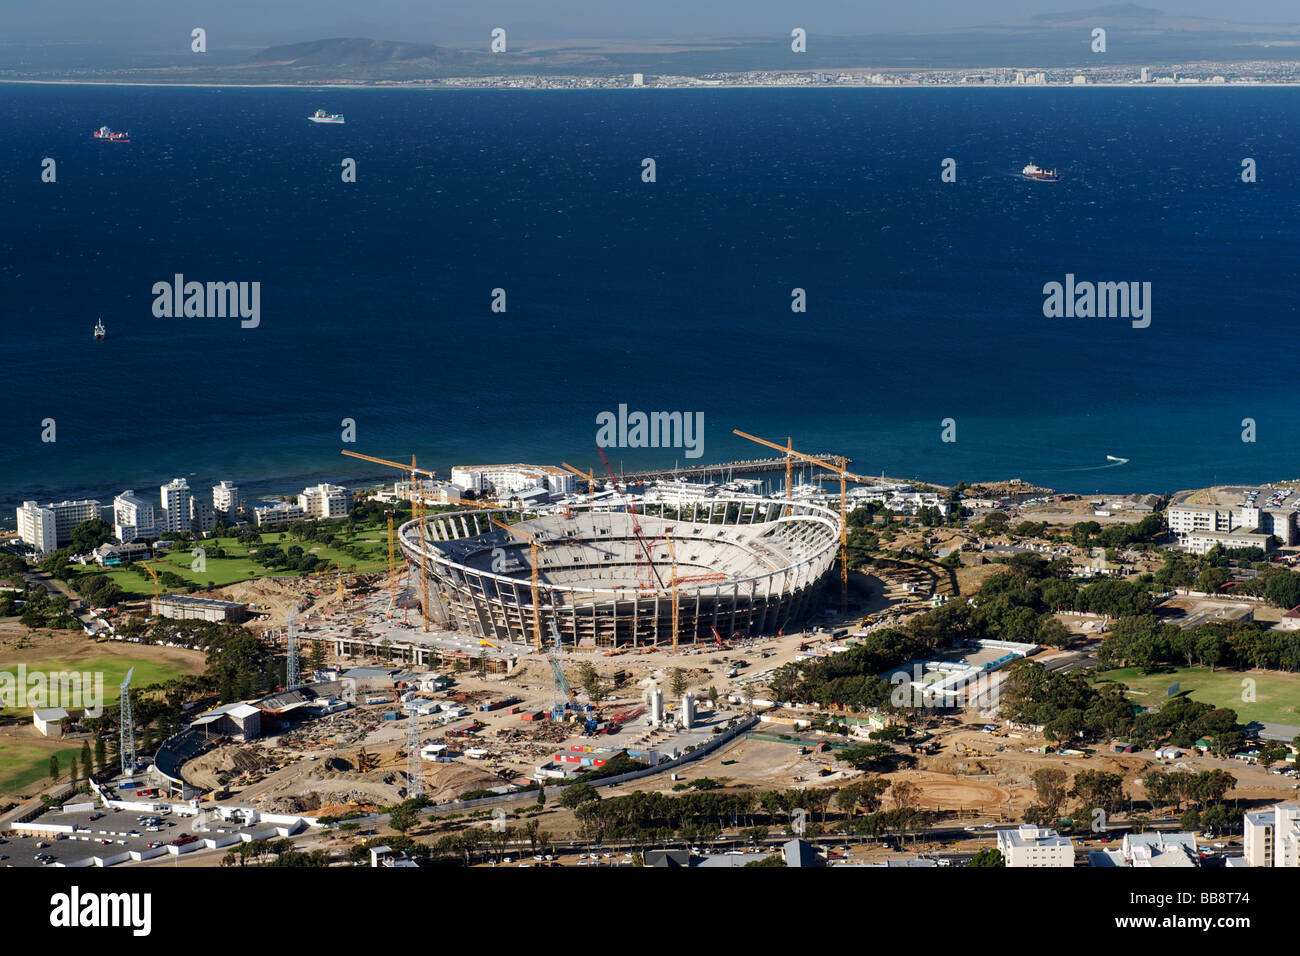 View of the 2010 FIFA world cup stadium under construction in Greenpoint, Cape Town, South Africa Stock Photo